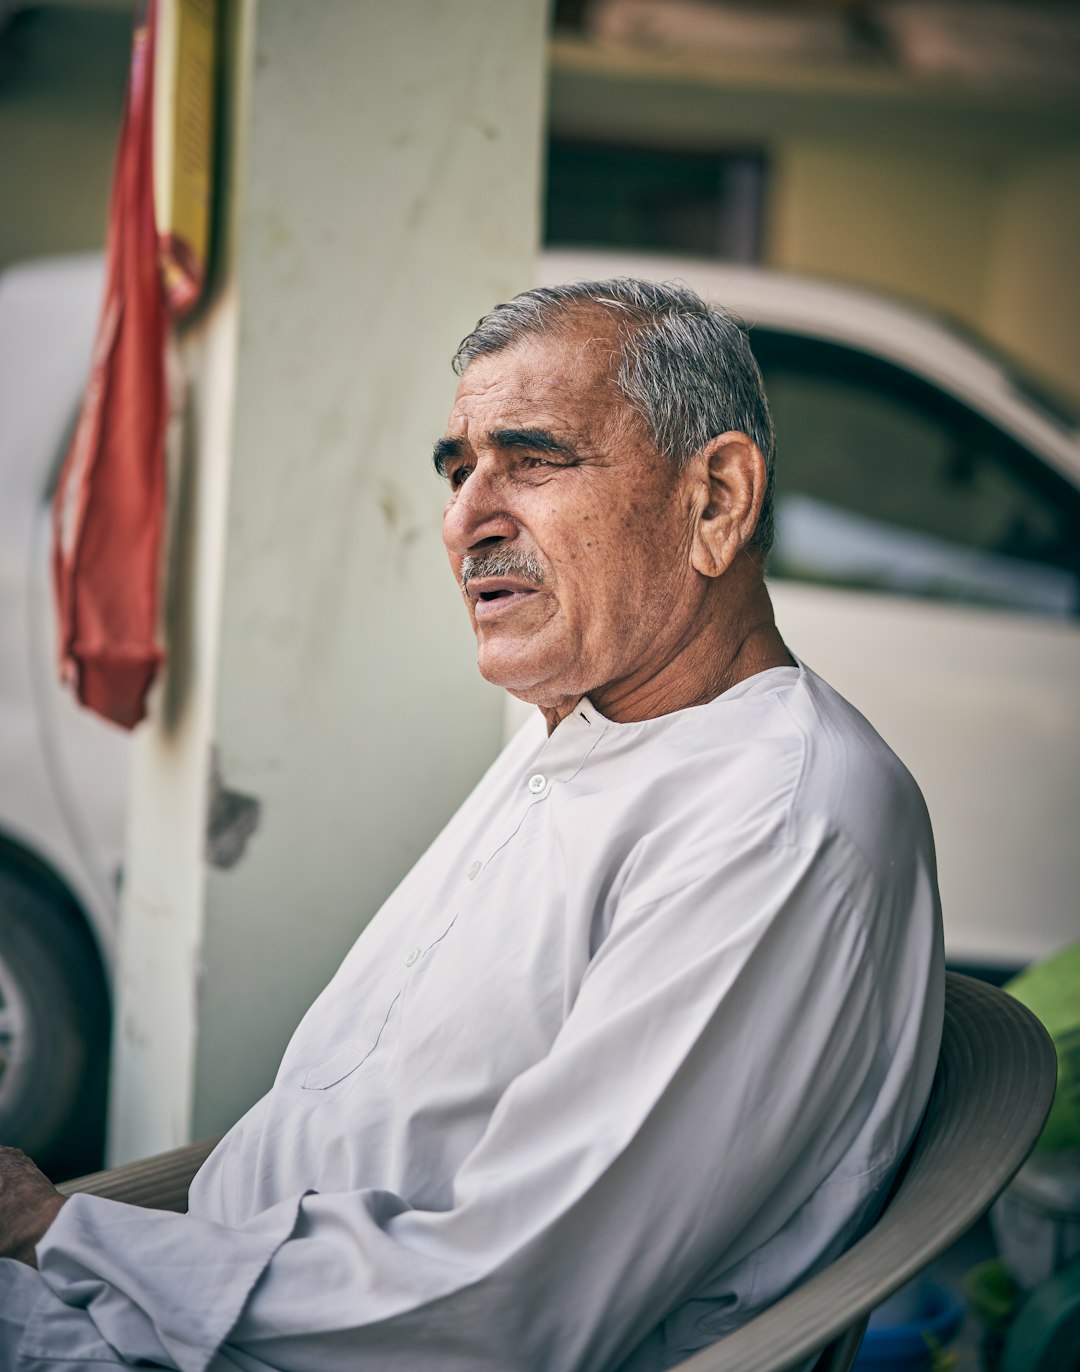 selective focus photography of sitting man in gray thobe during daytime